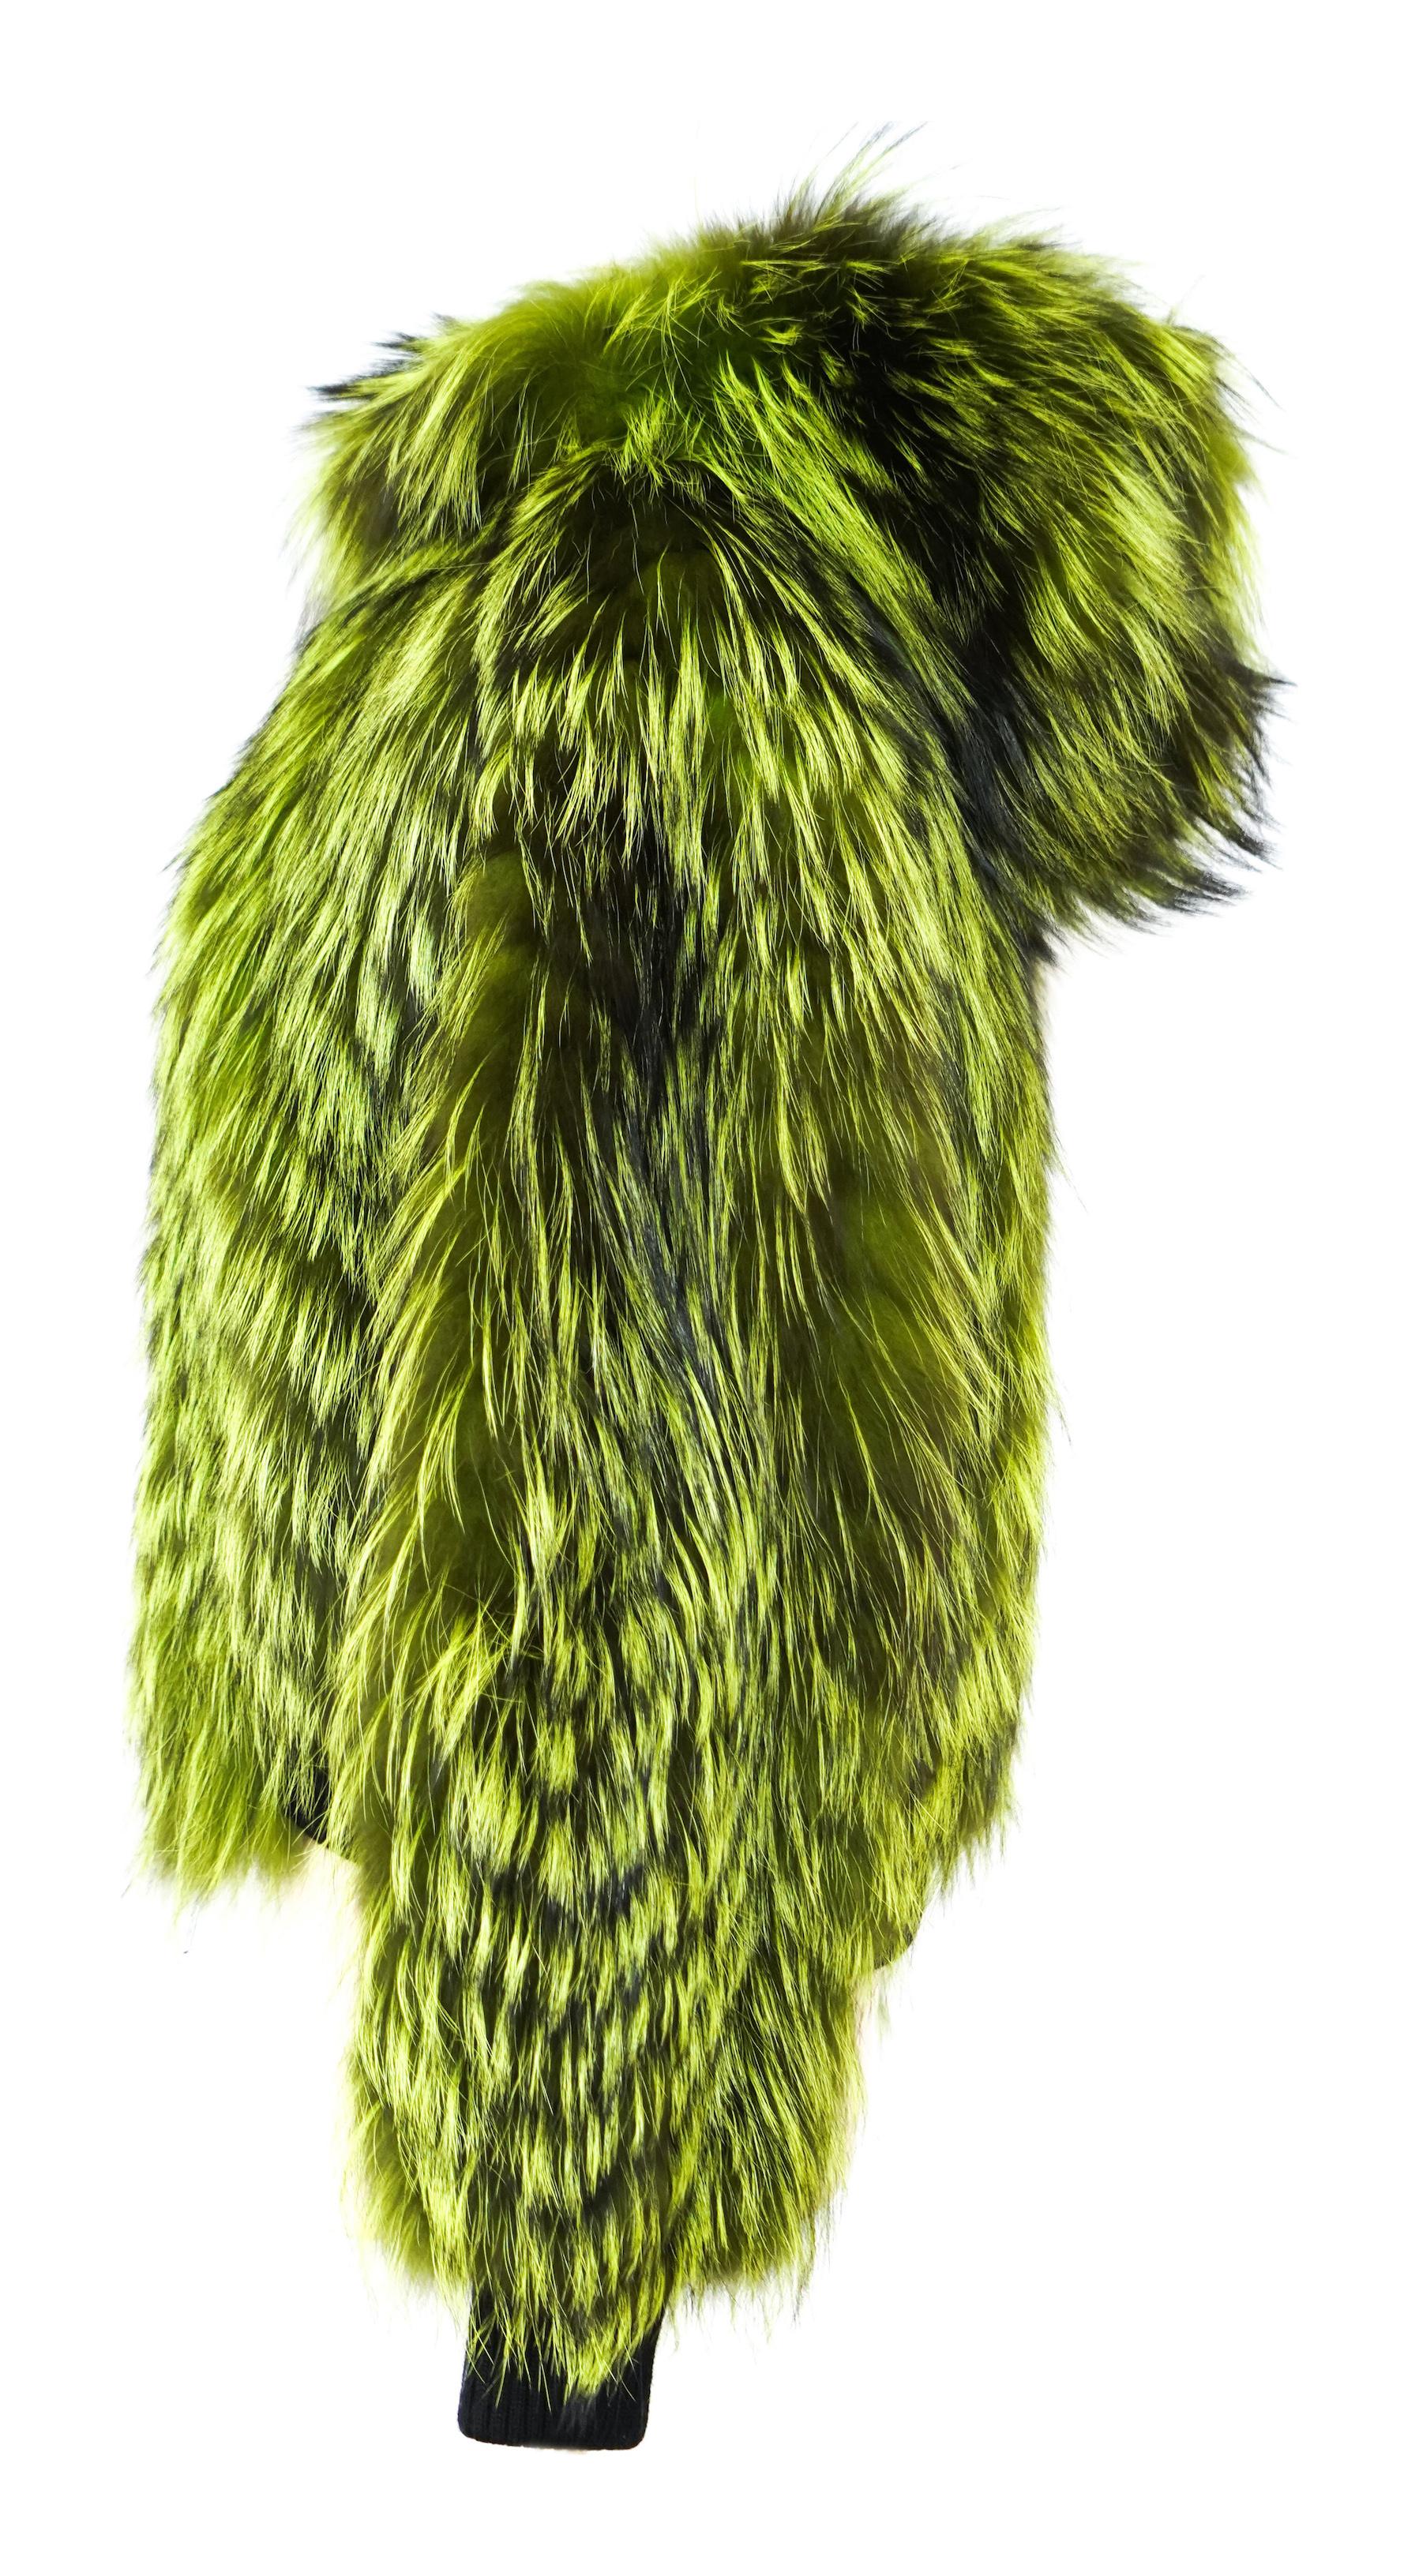 Silver fox jacket. 100% silk lining.
Color: lime green.